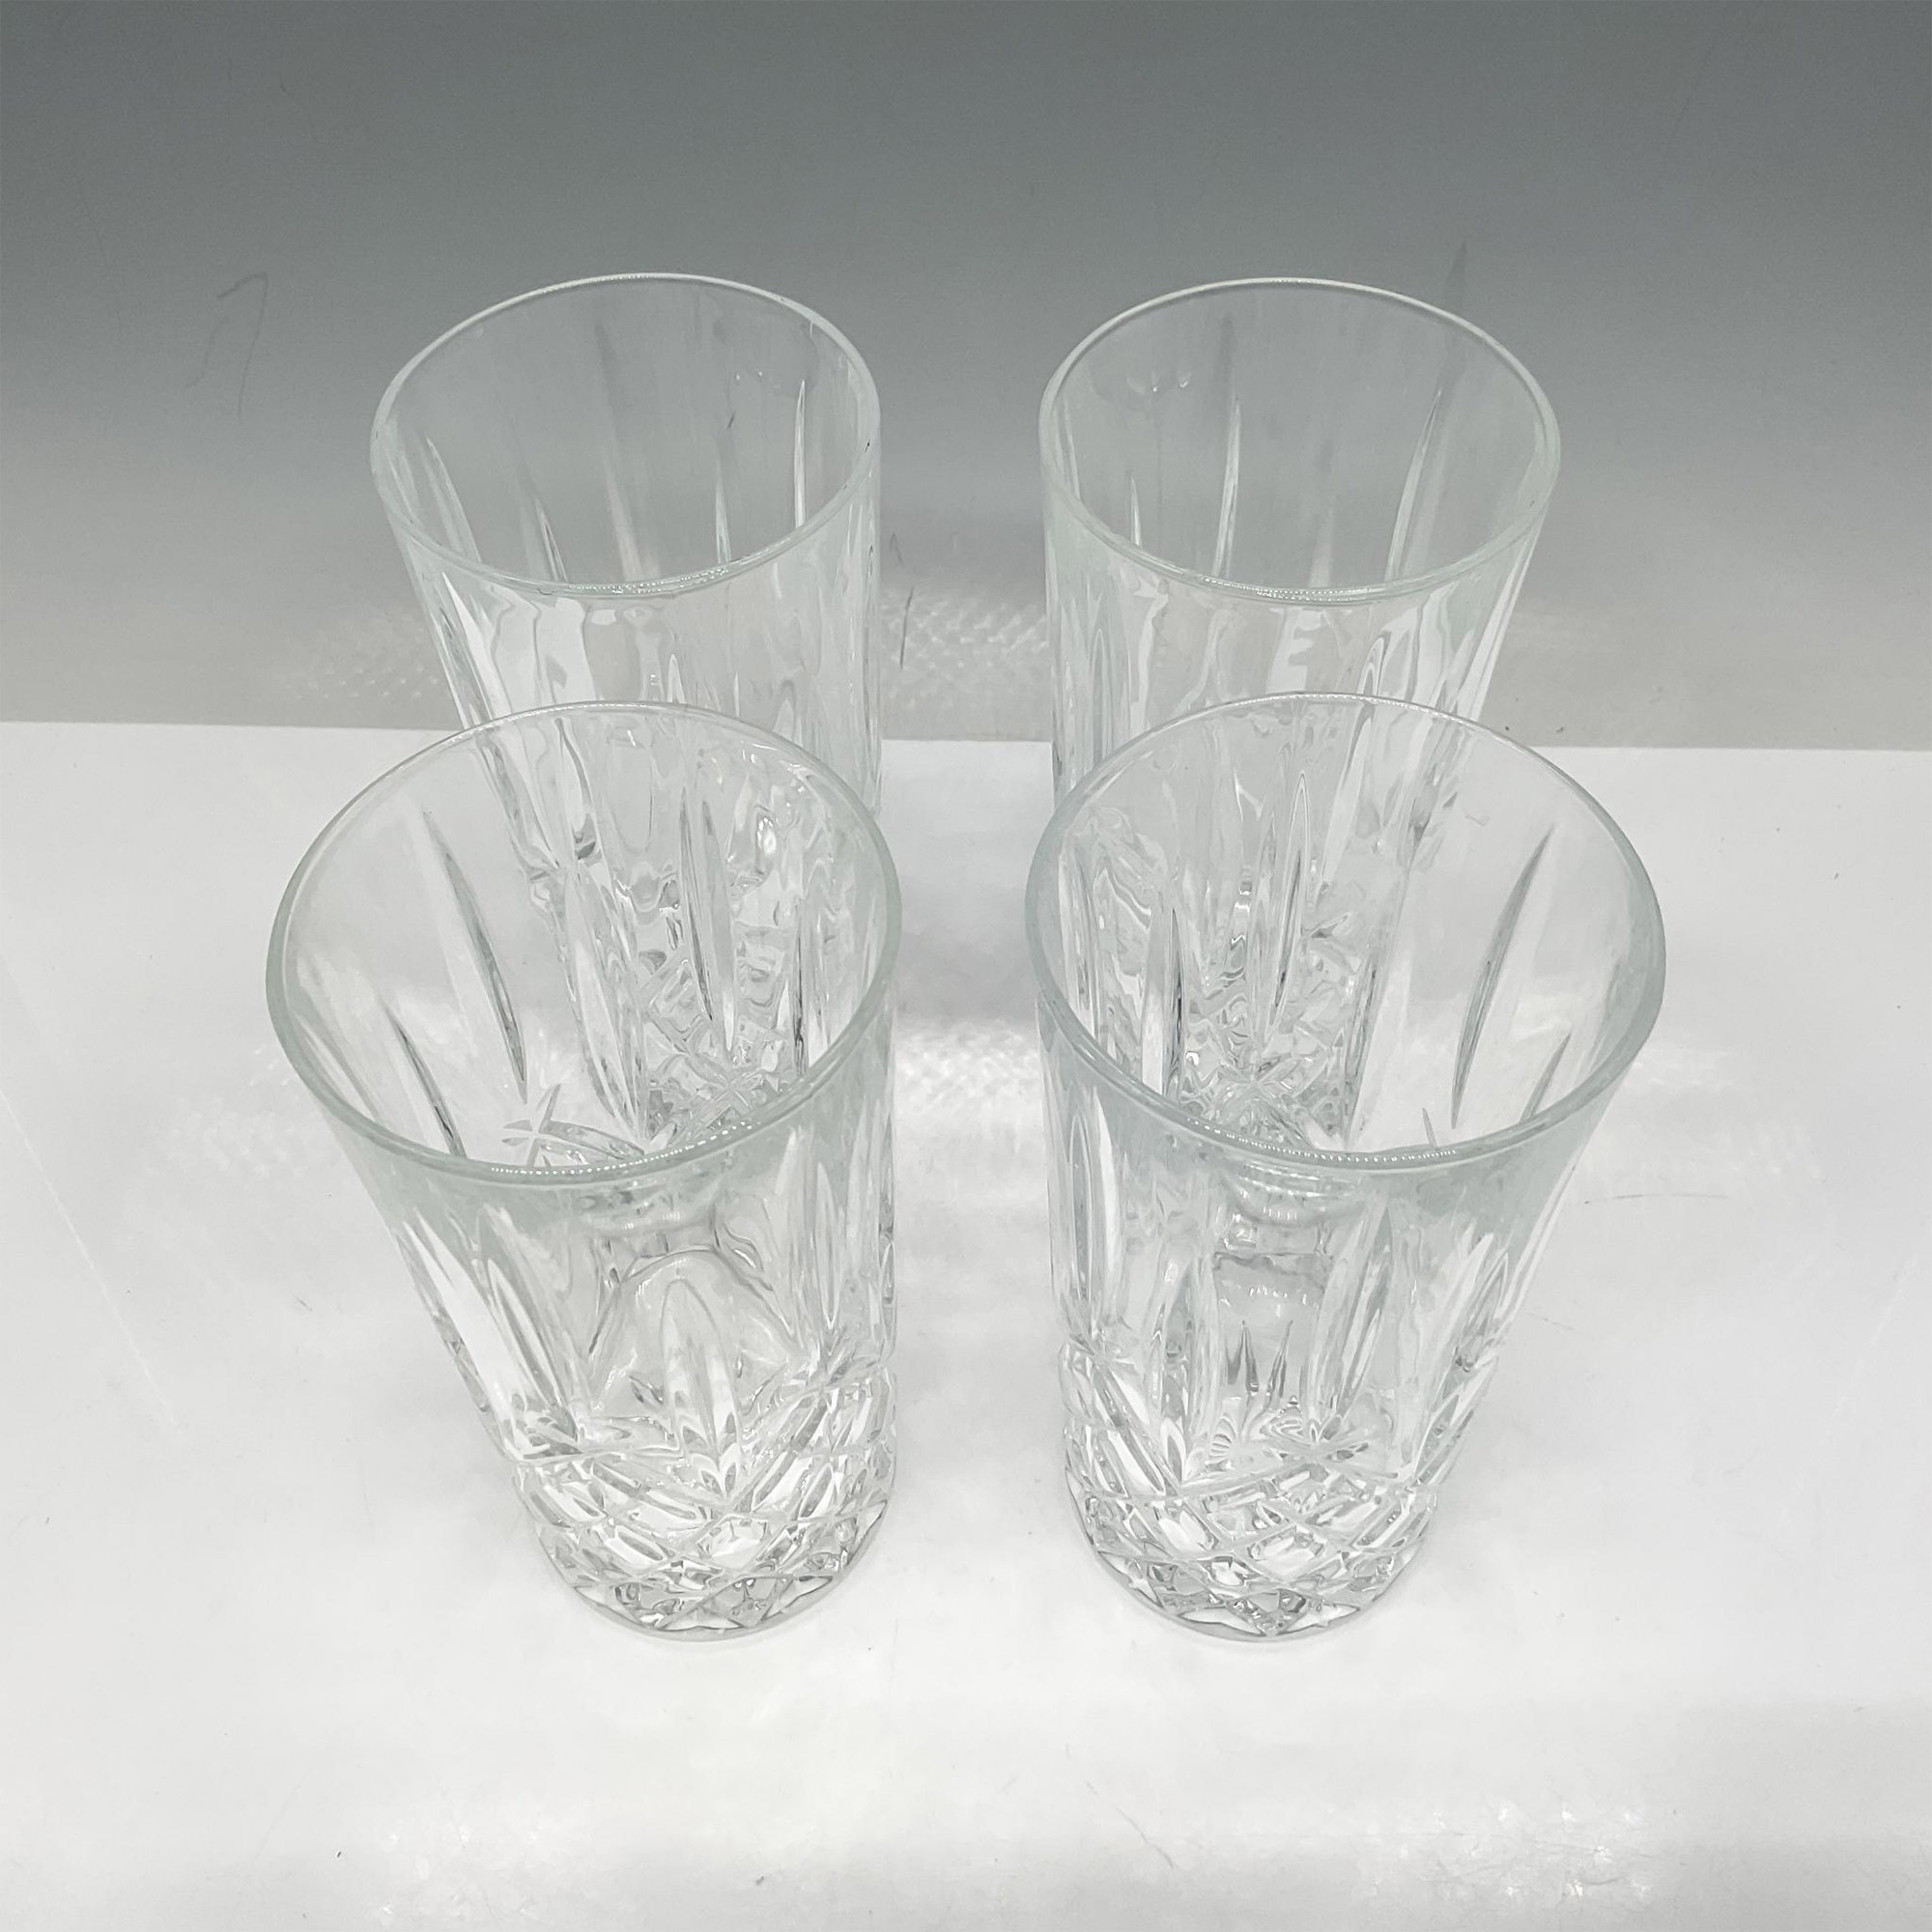 4pc Waterford Crystal Highball Glasses - Image 2 of 3